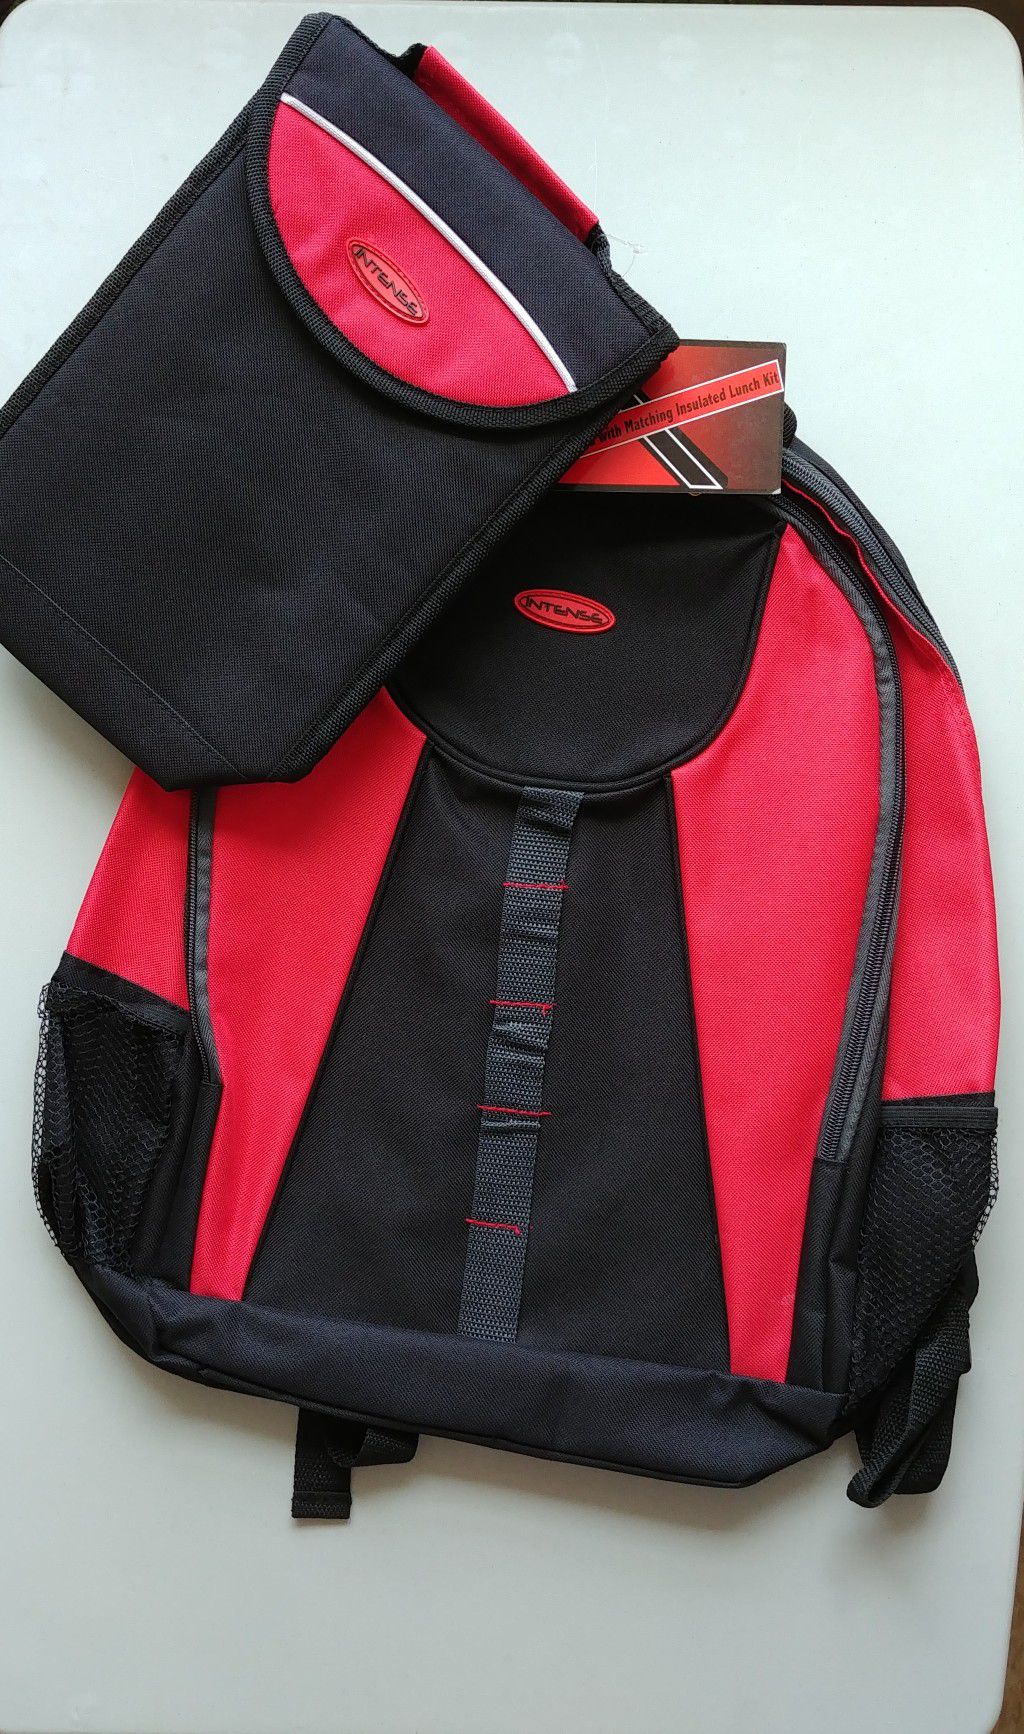 New Intense Red Backpack & Insulated Lunch bag for Work School